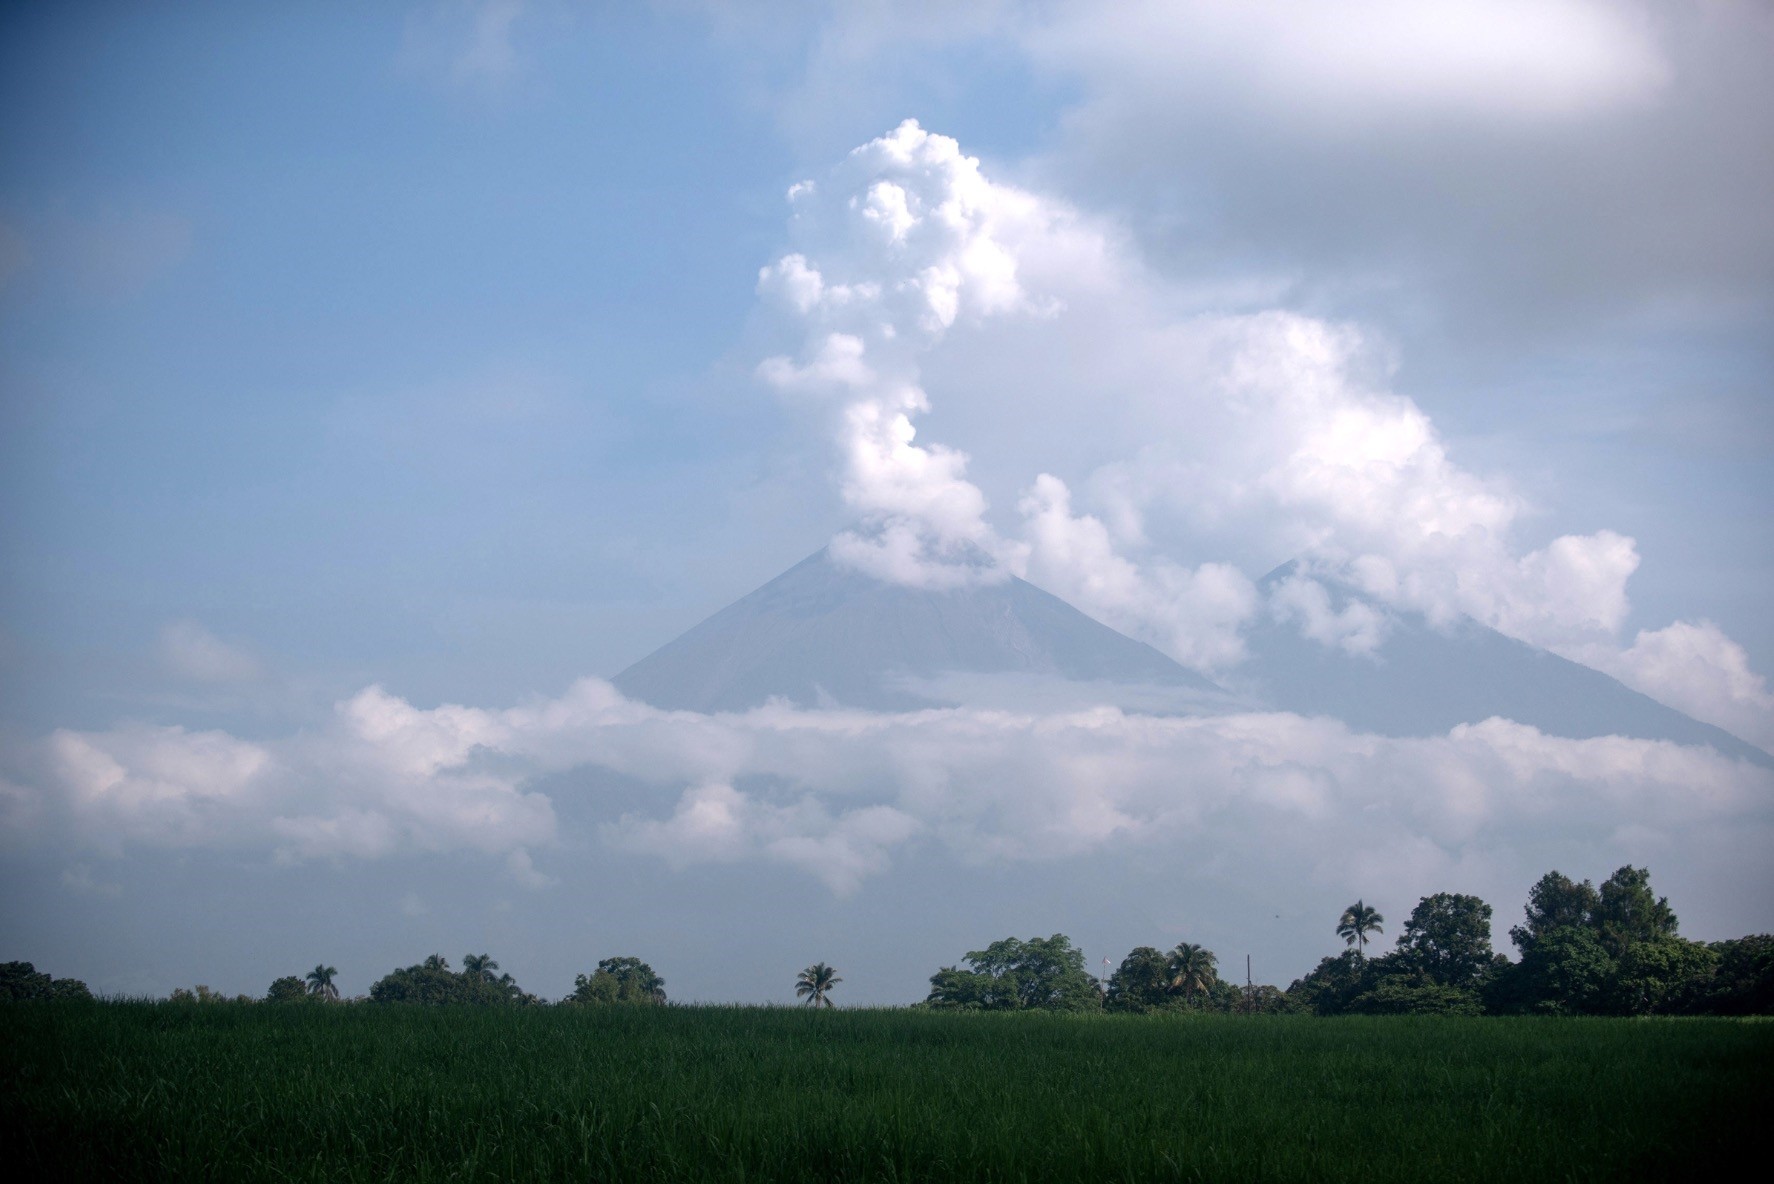 View of the Fuego volcano from Escuintla, Guatemala.